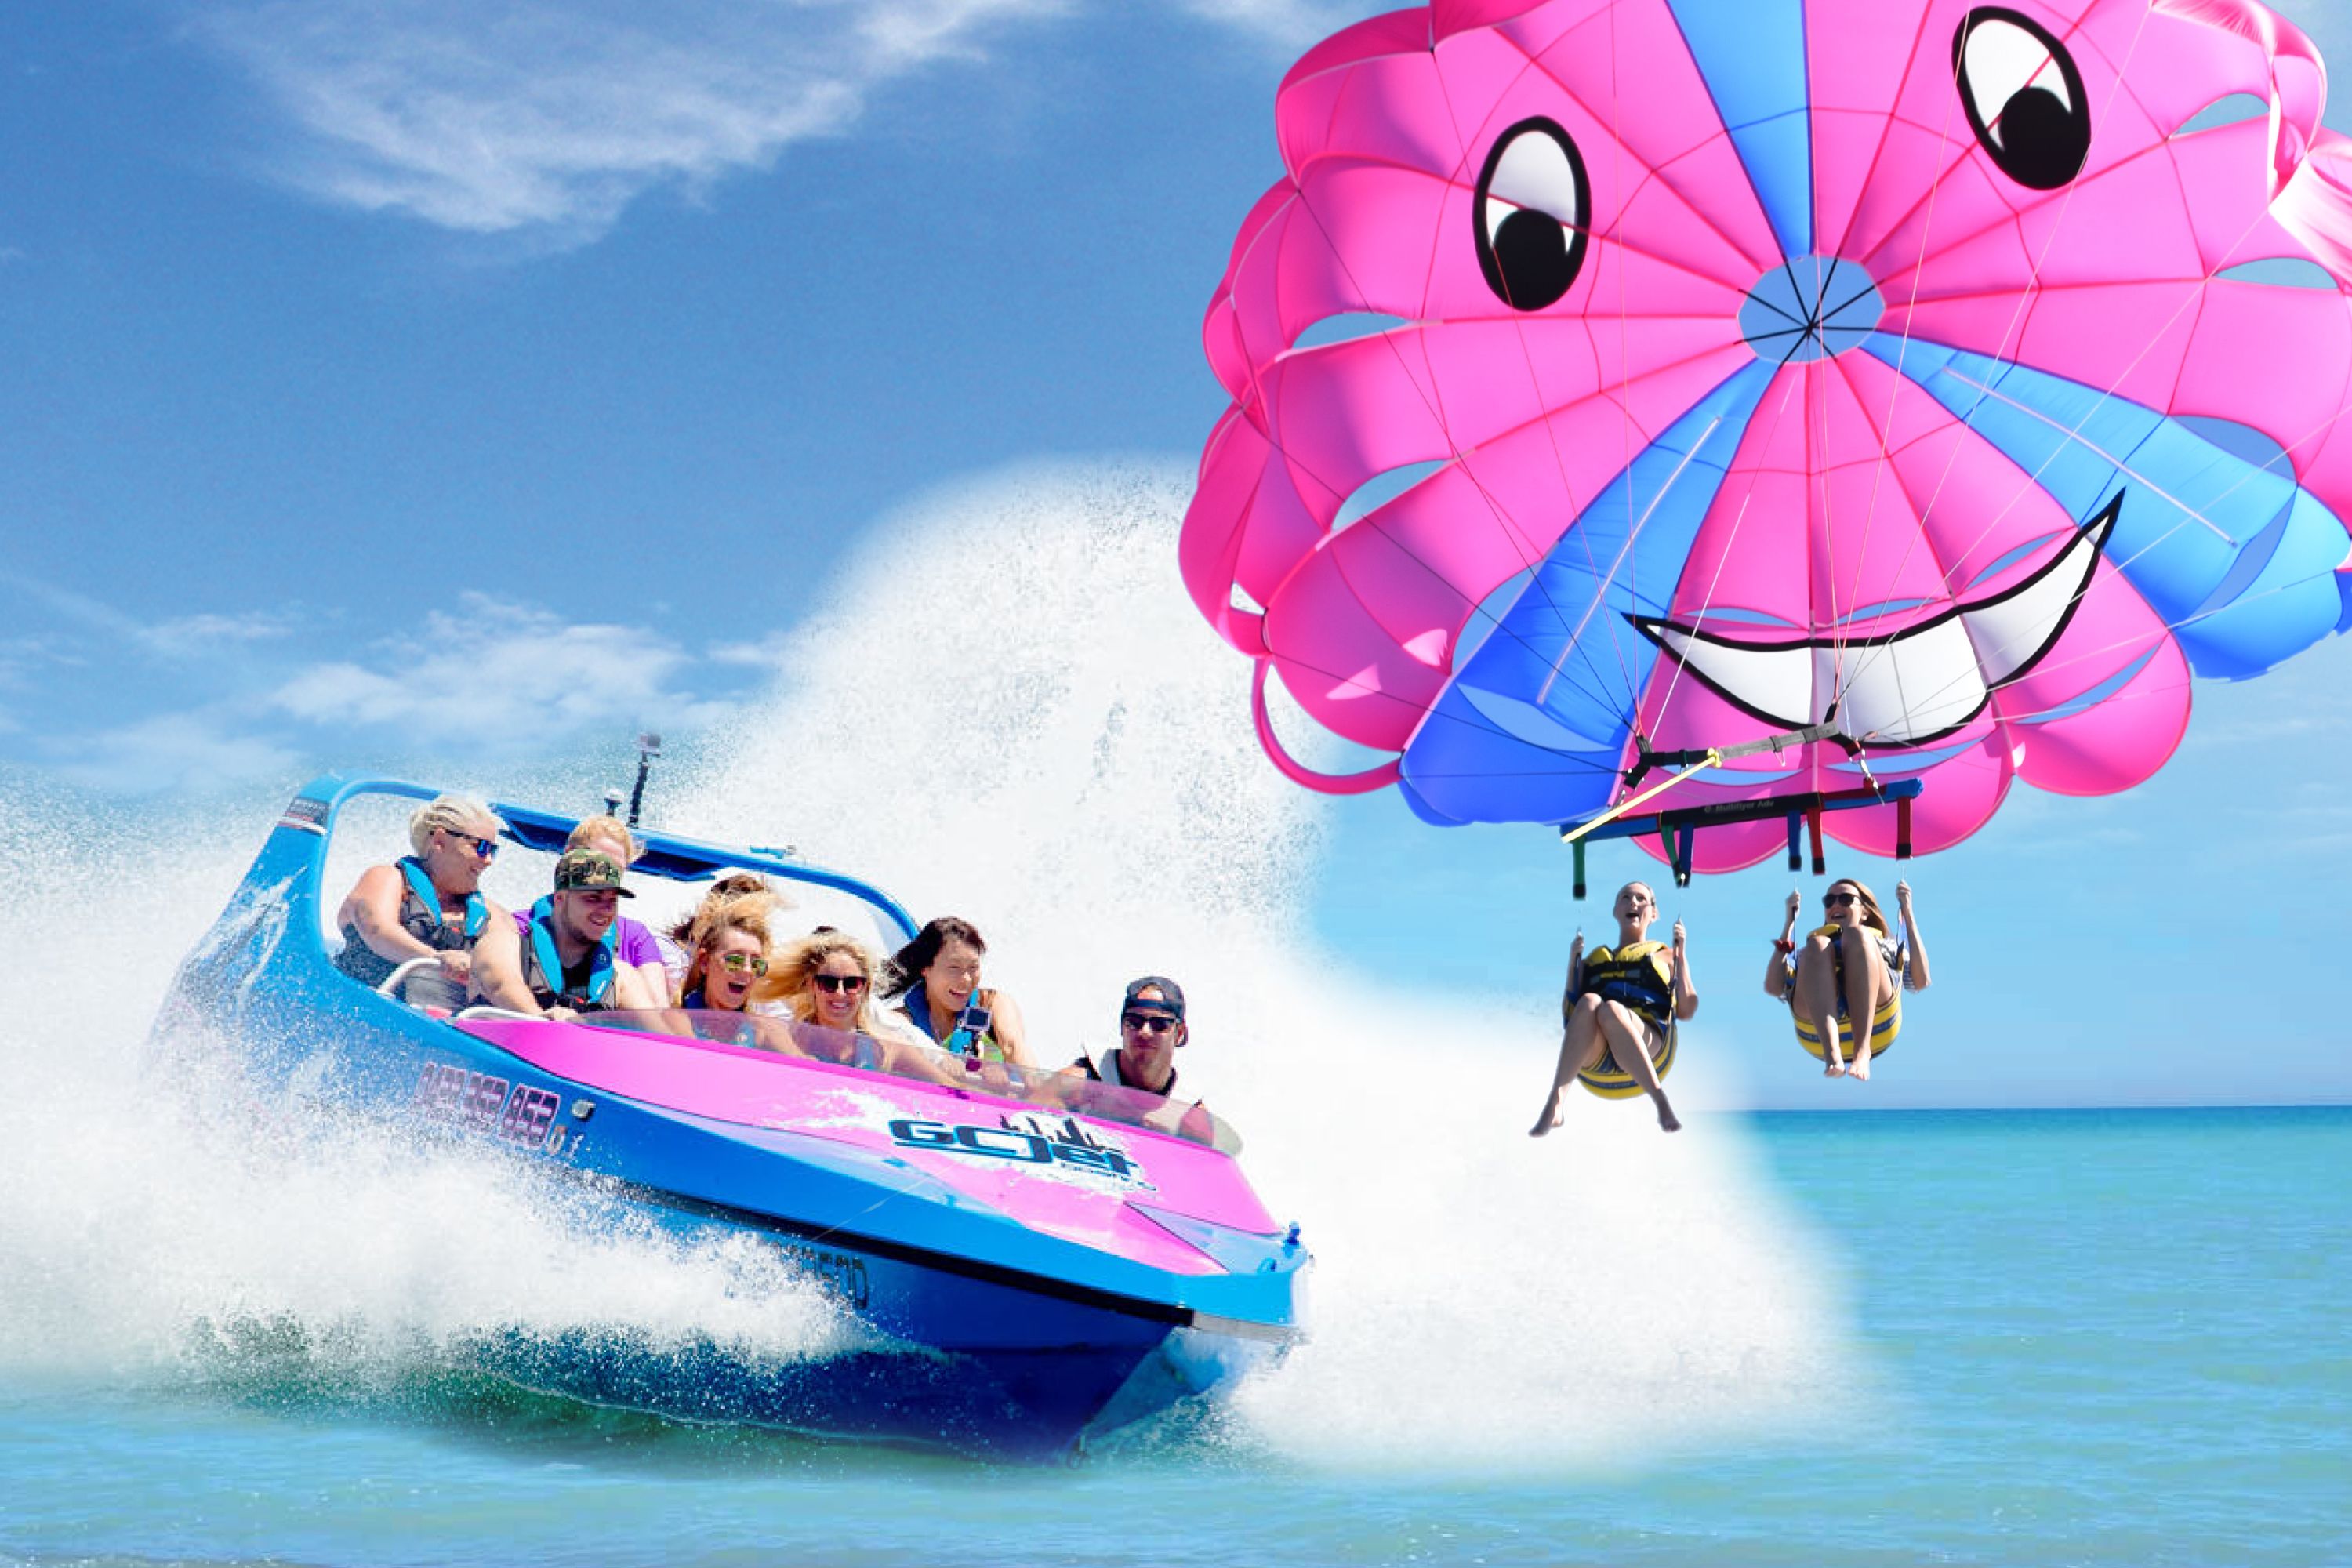 214 Attractions & Fun Things to Do in Gold Coast from NZ$16 | Expedia.co.nz